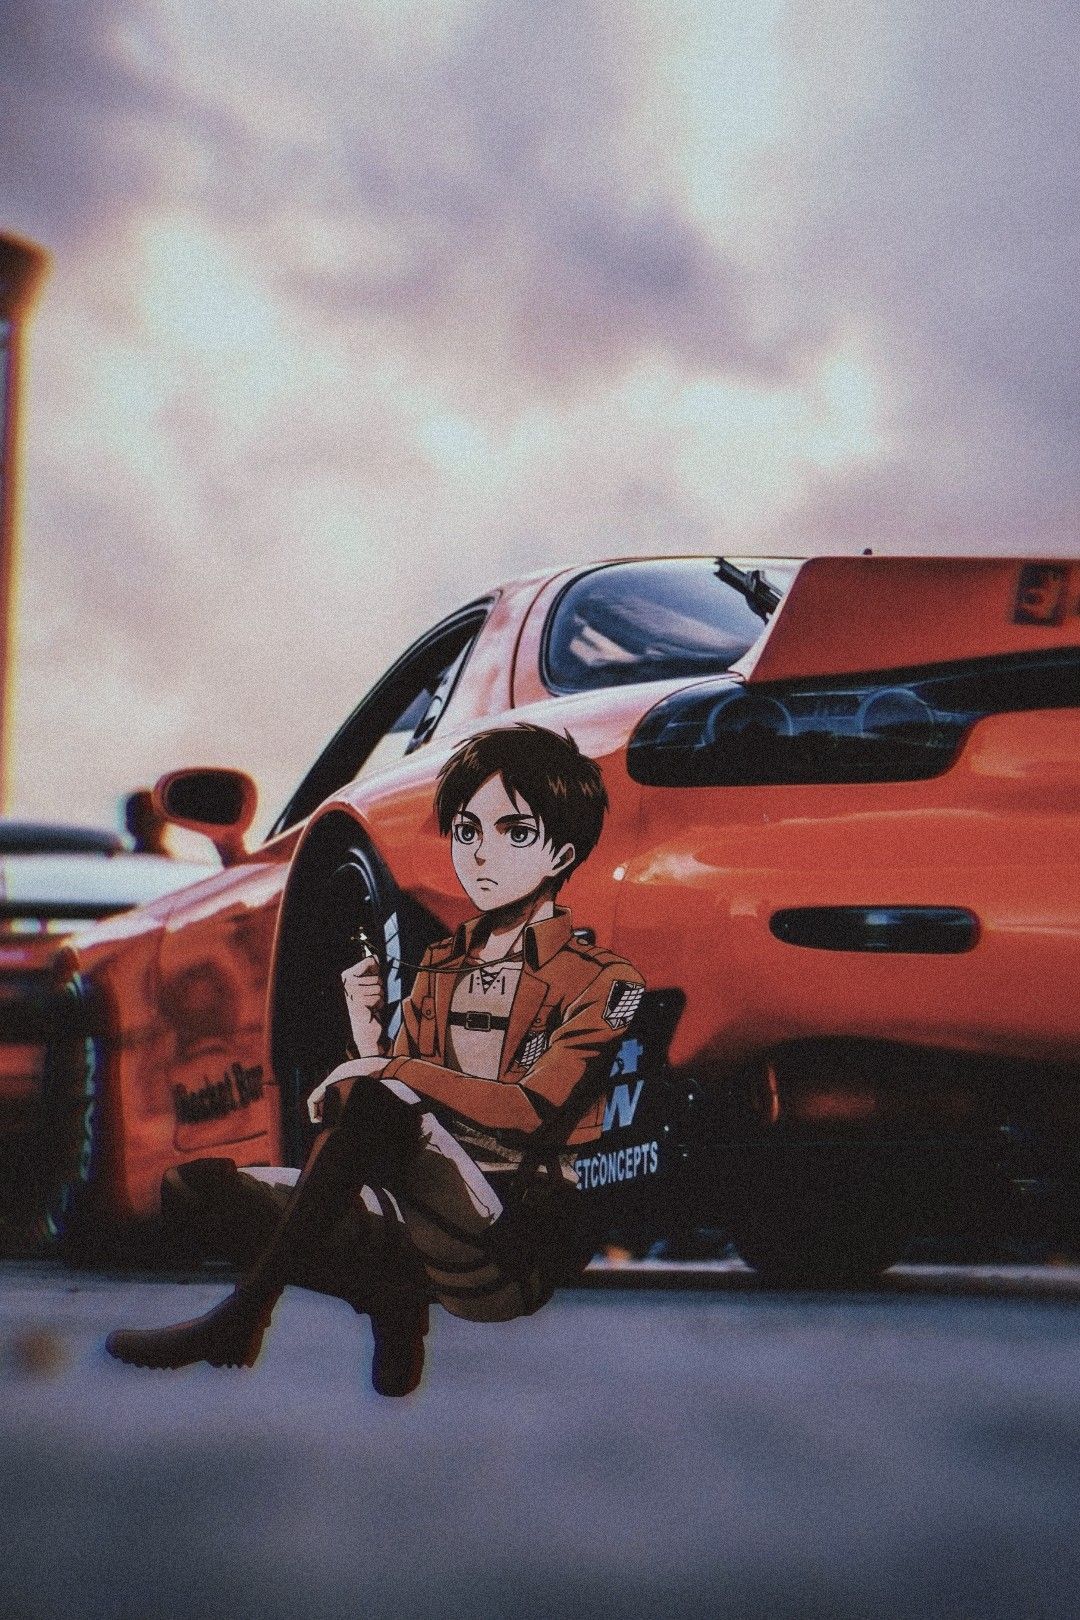 A Collection of JDM X ANIME WALLPAPER MADE BY ME. Car wallpaper, Jdm wallpaper, HD wallpaper of cars